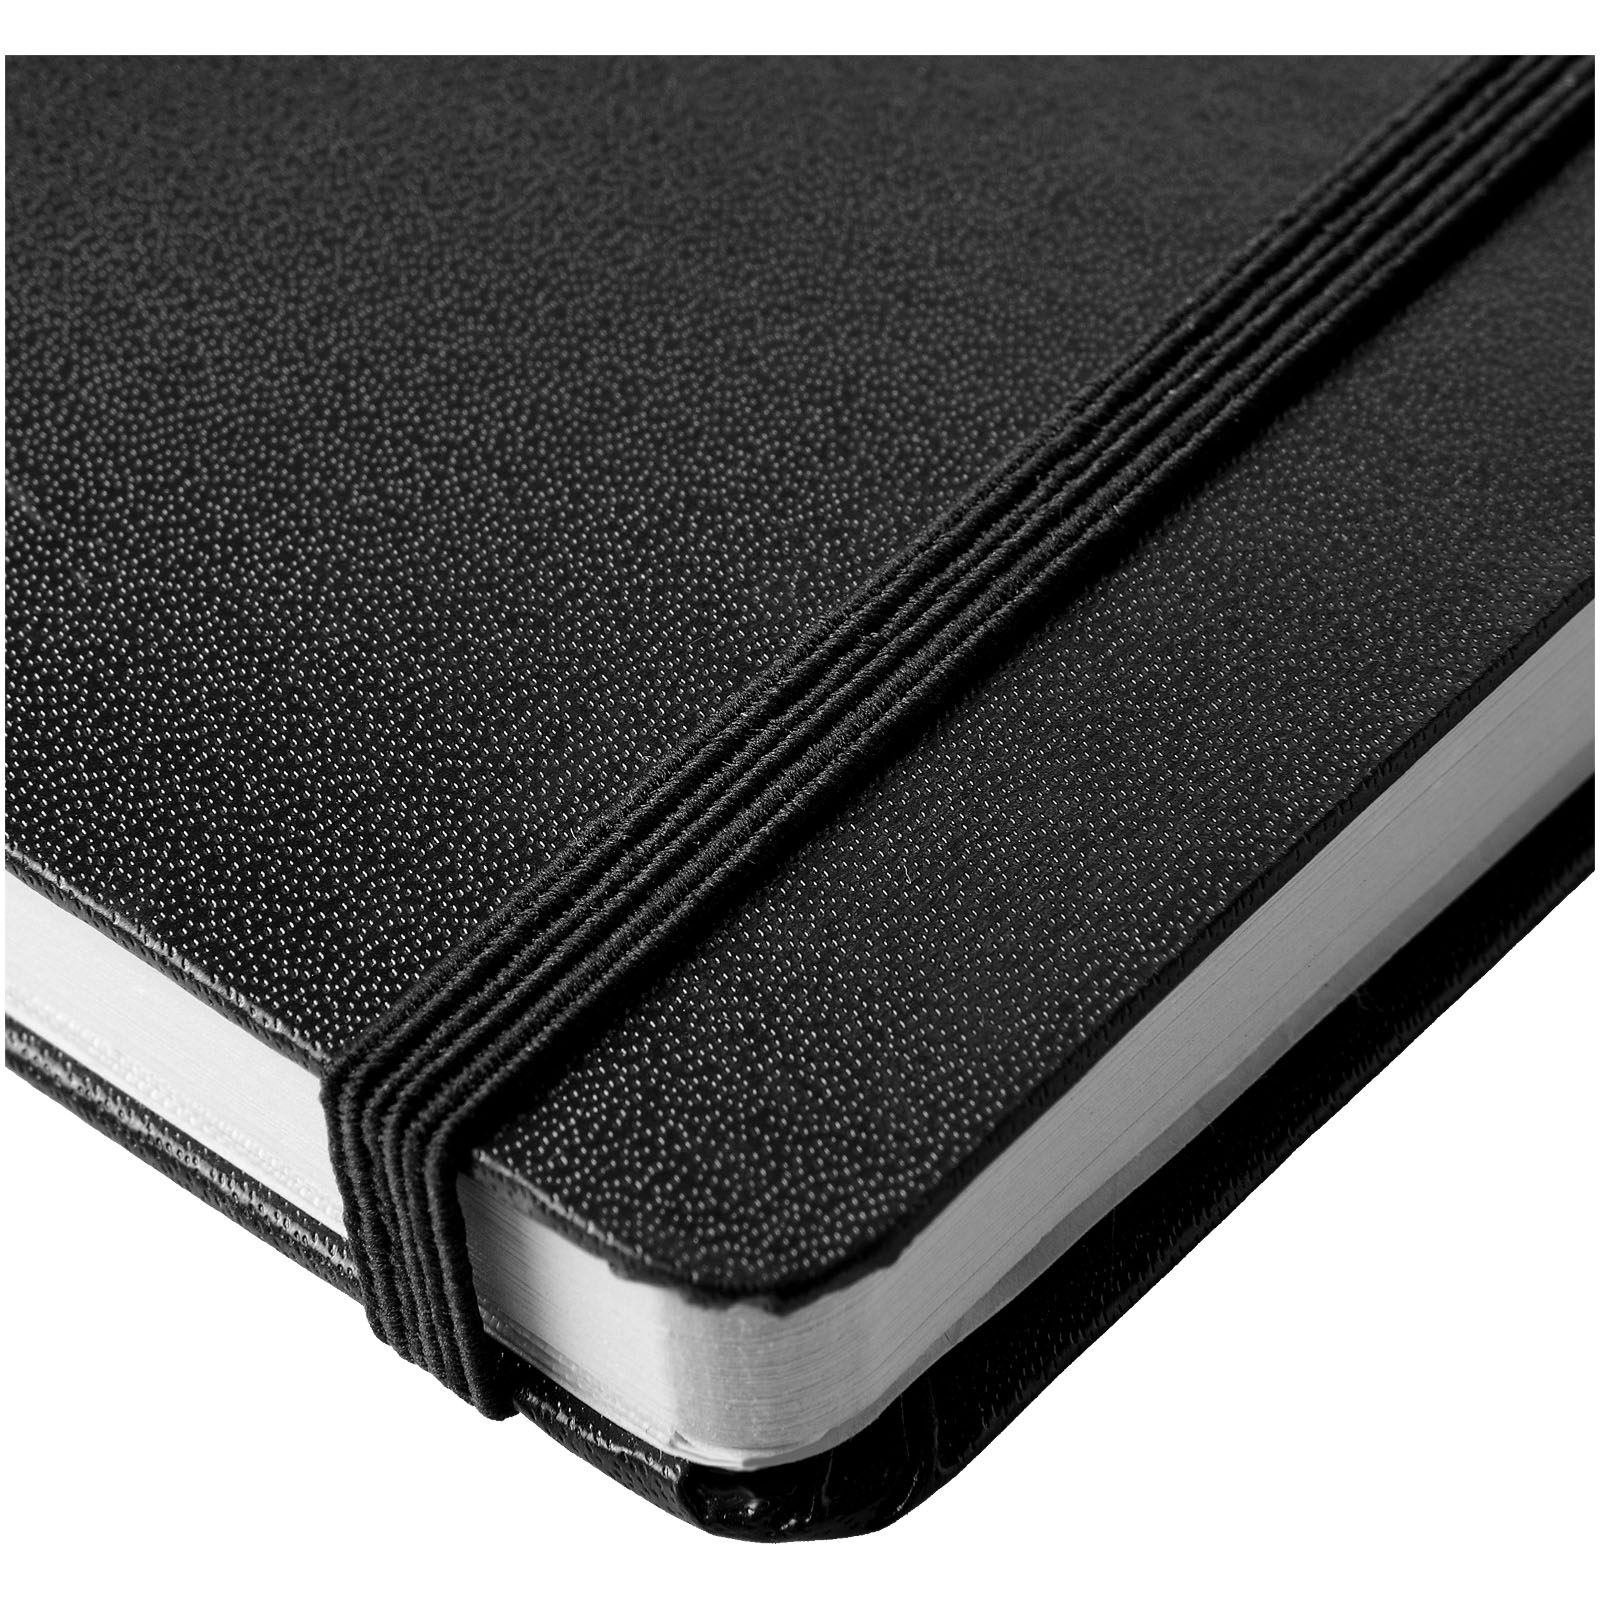 Advertising Hard cover notebooks - Executive A4 hard cover notebook - 5